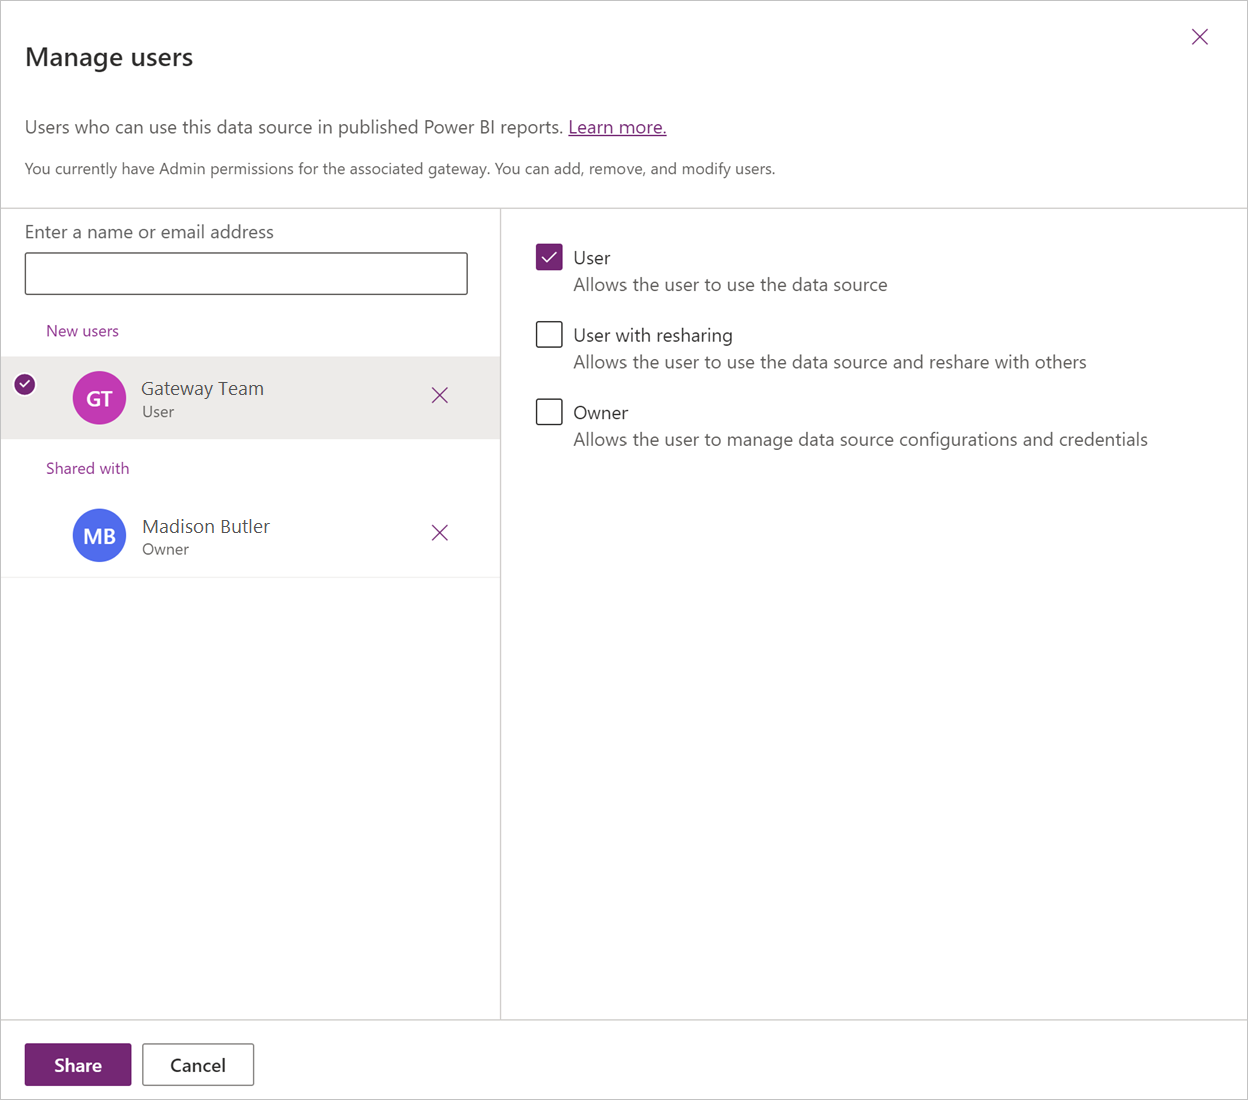 Image of the Manage users dialog box, with a new user emphasized, and the User role selected.